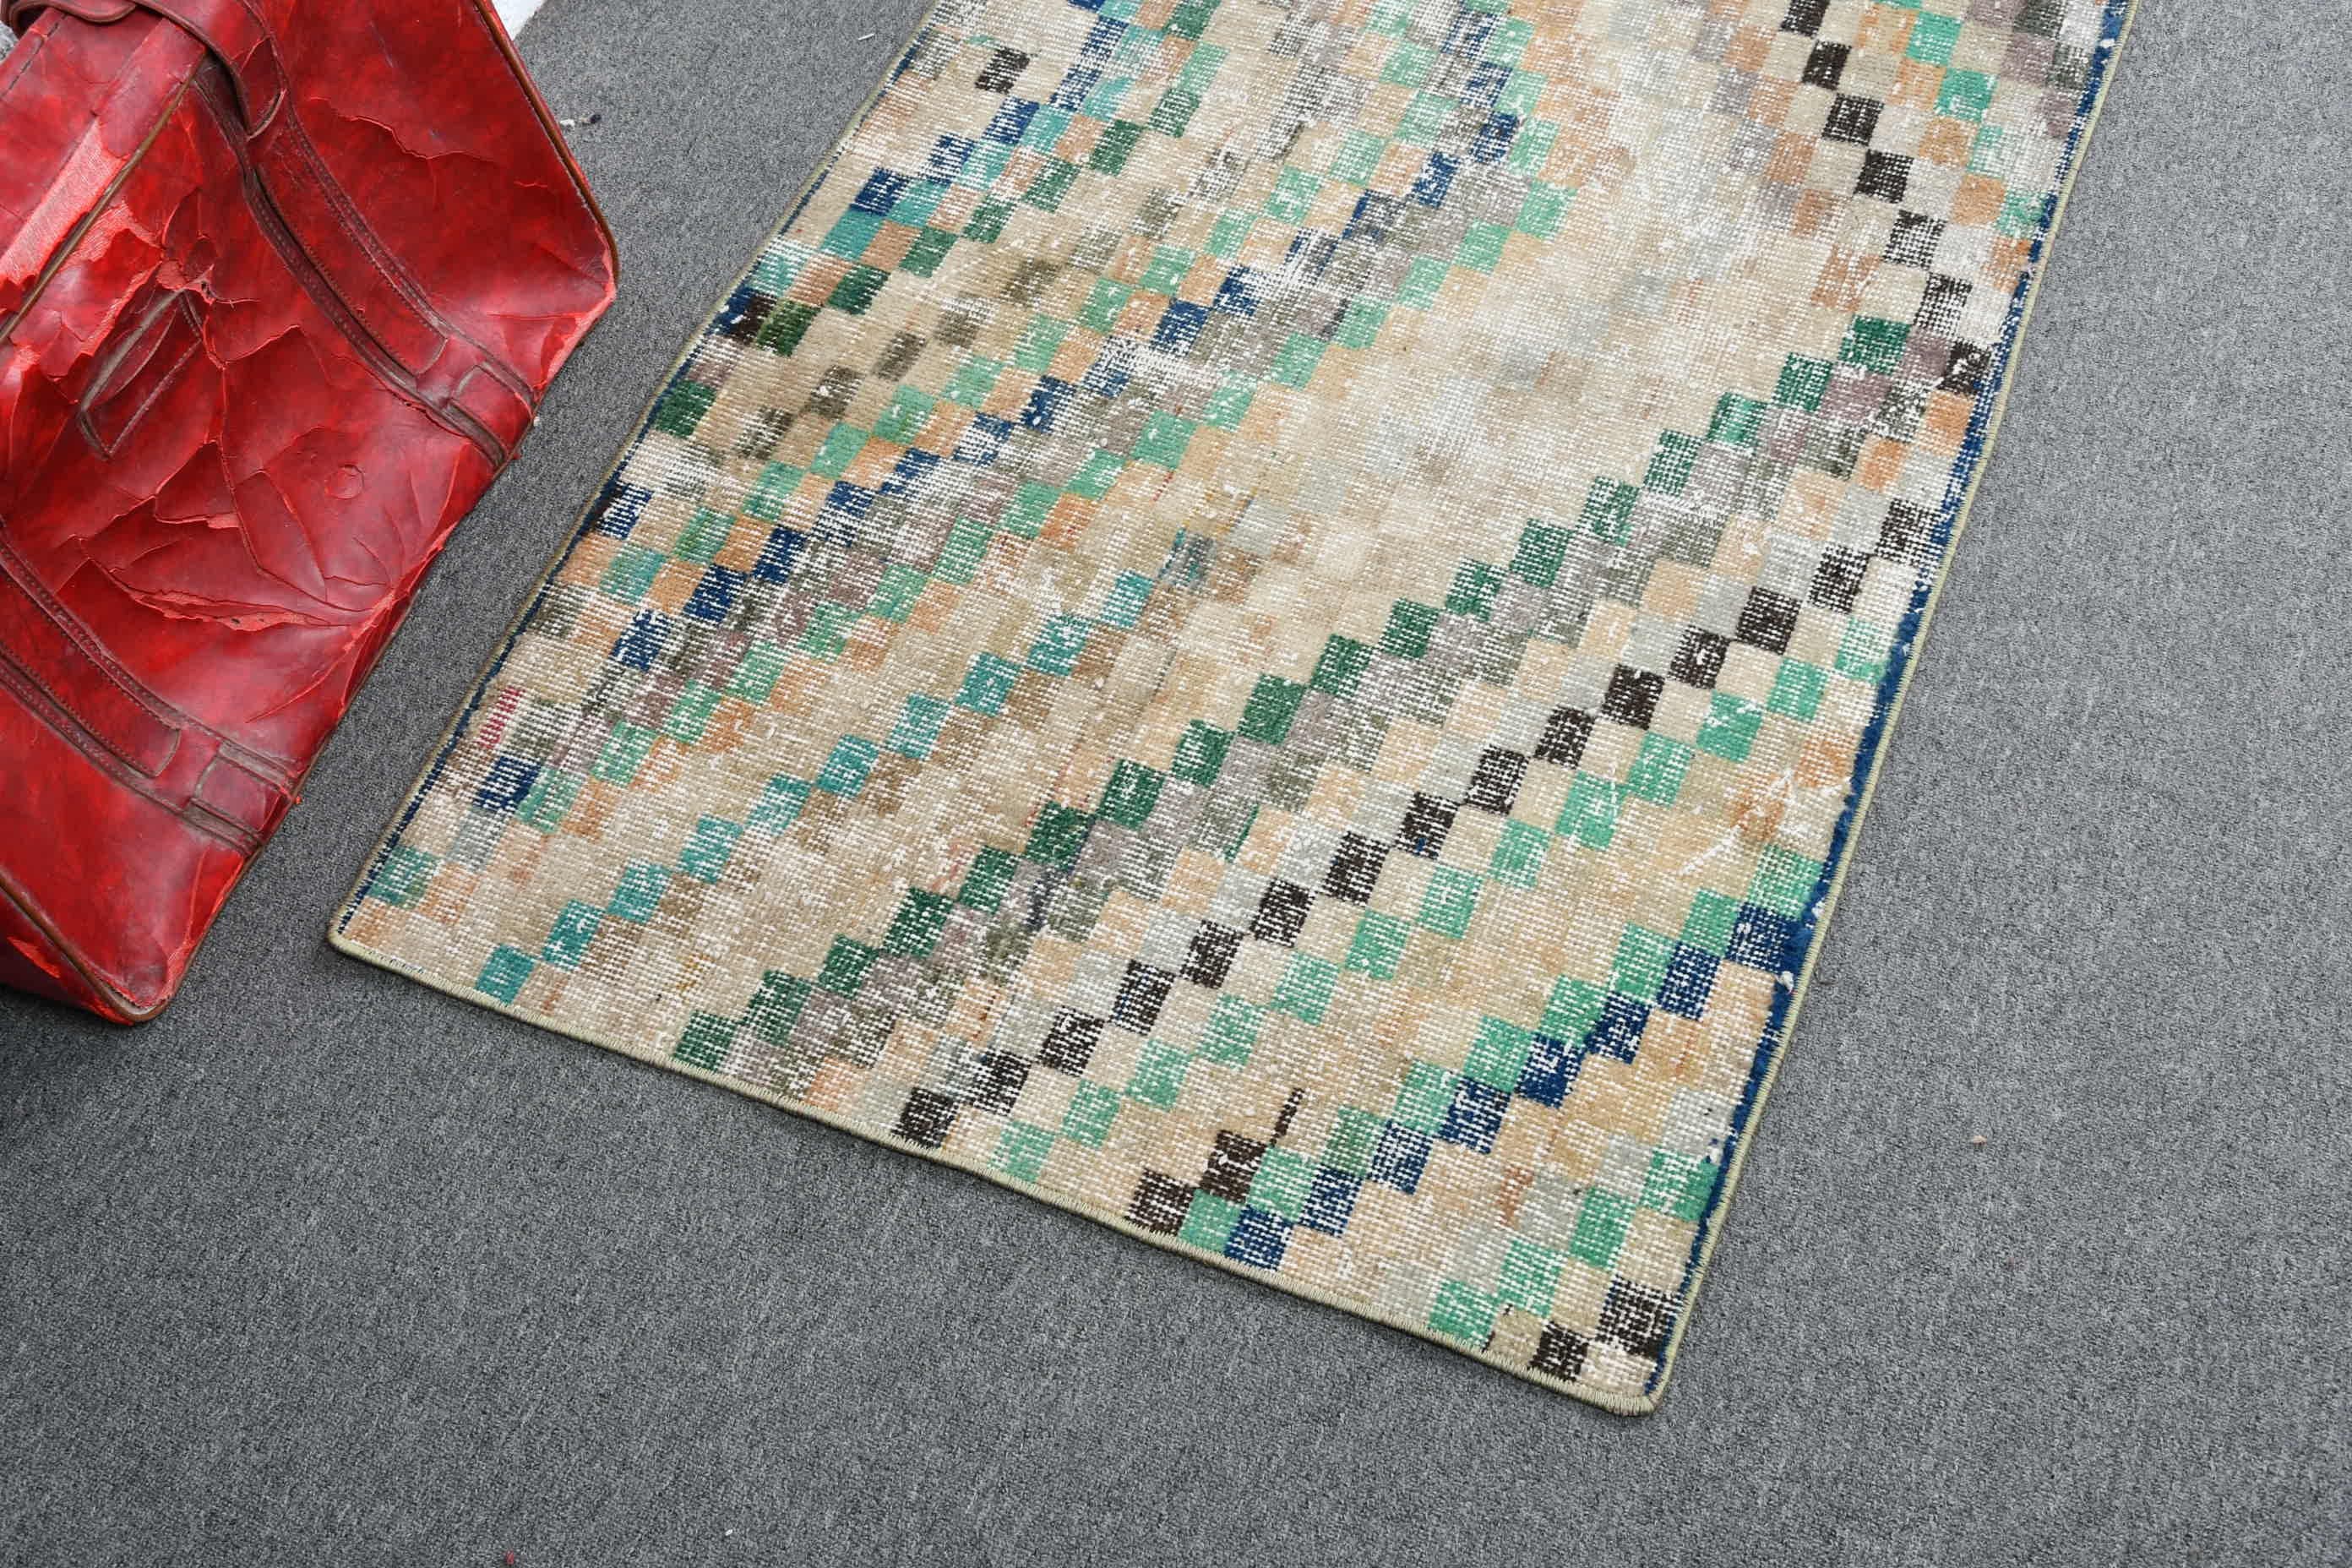 Kitchen Rugs, Pale Rug, Bronze Oushak Rug, Vintage Rugs, Antique Rugs, Entry Rugs, Turkish Rugs, 2.8x5.3 ft Small Rug, Bedroom Rugs